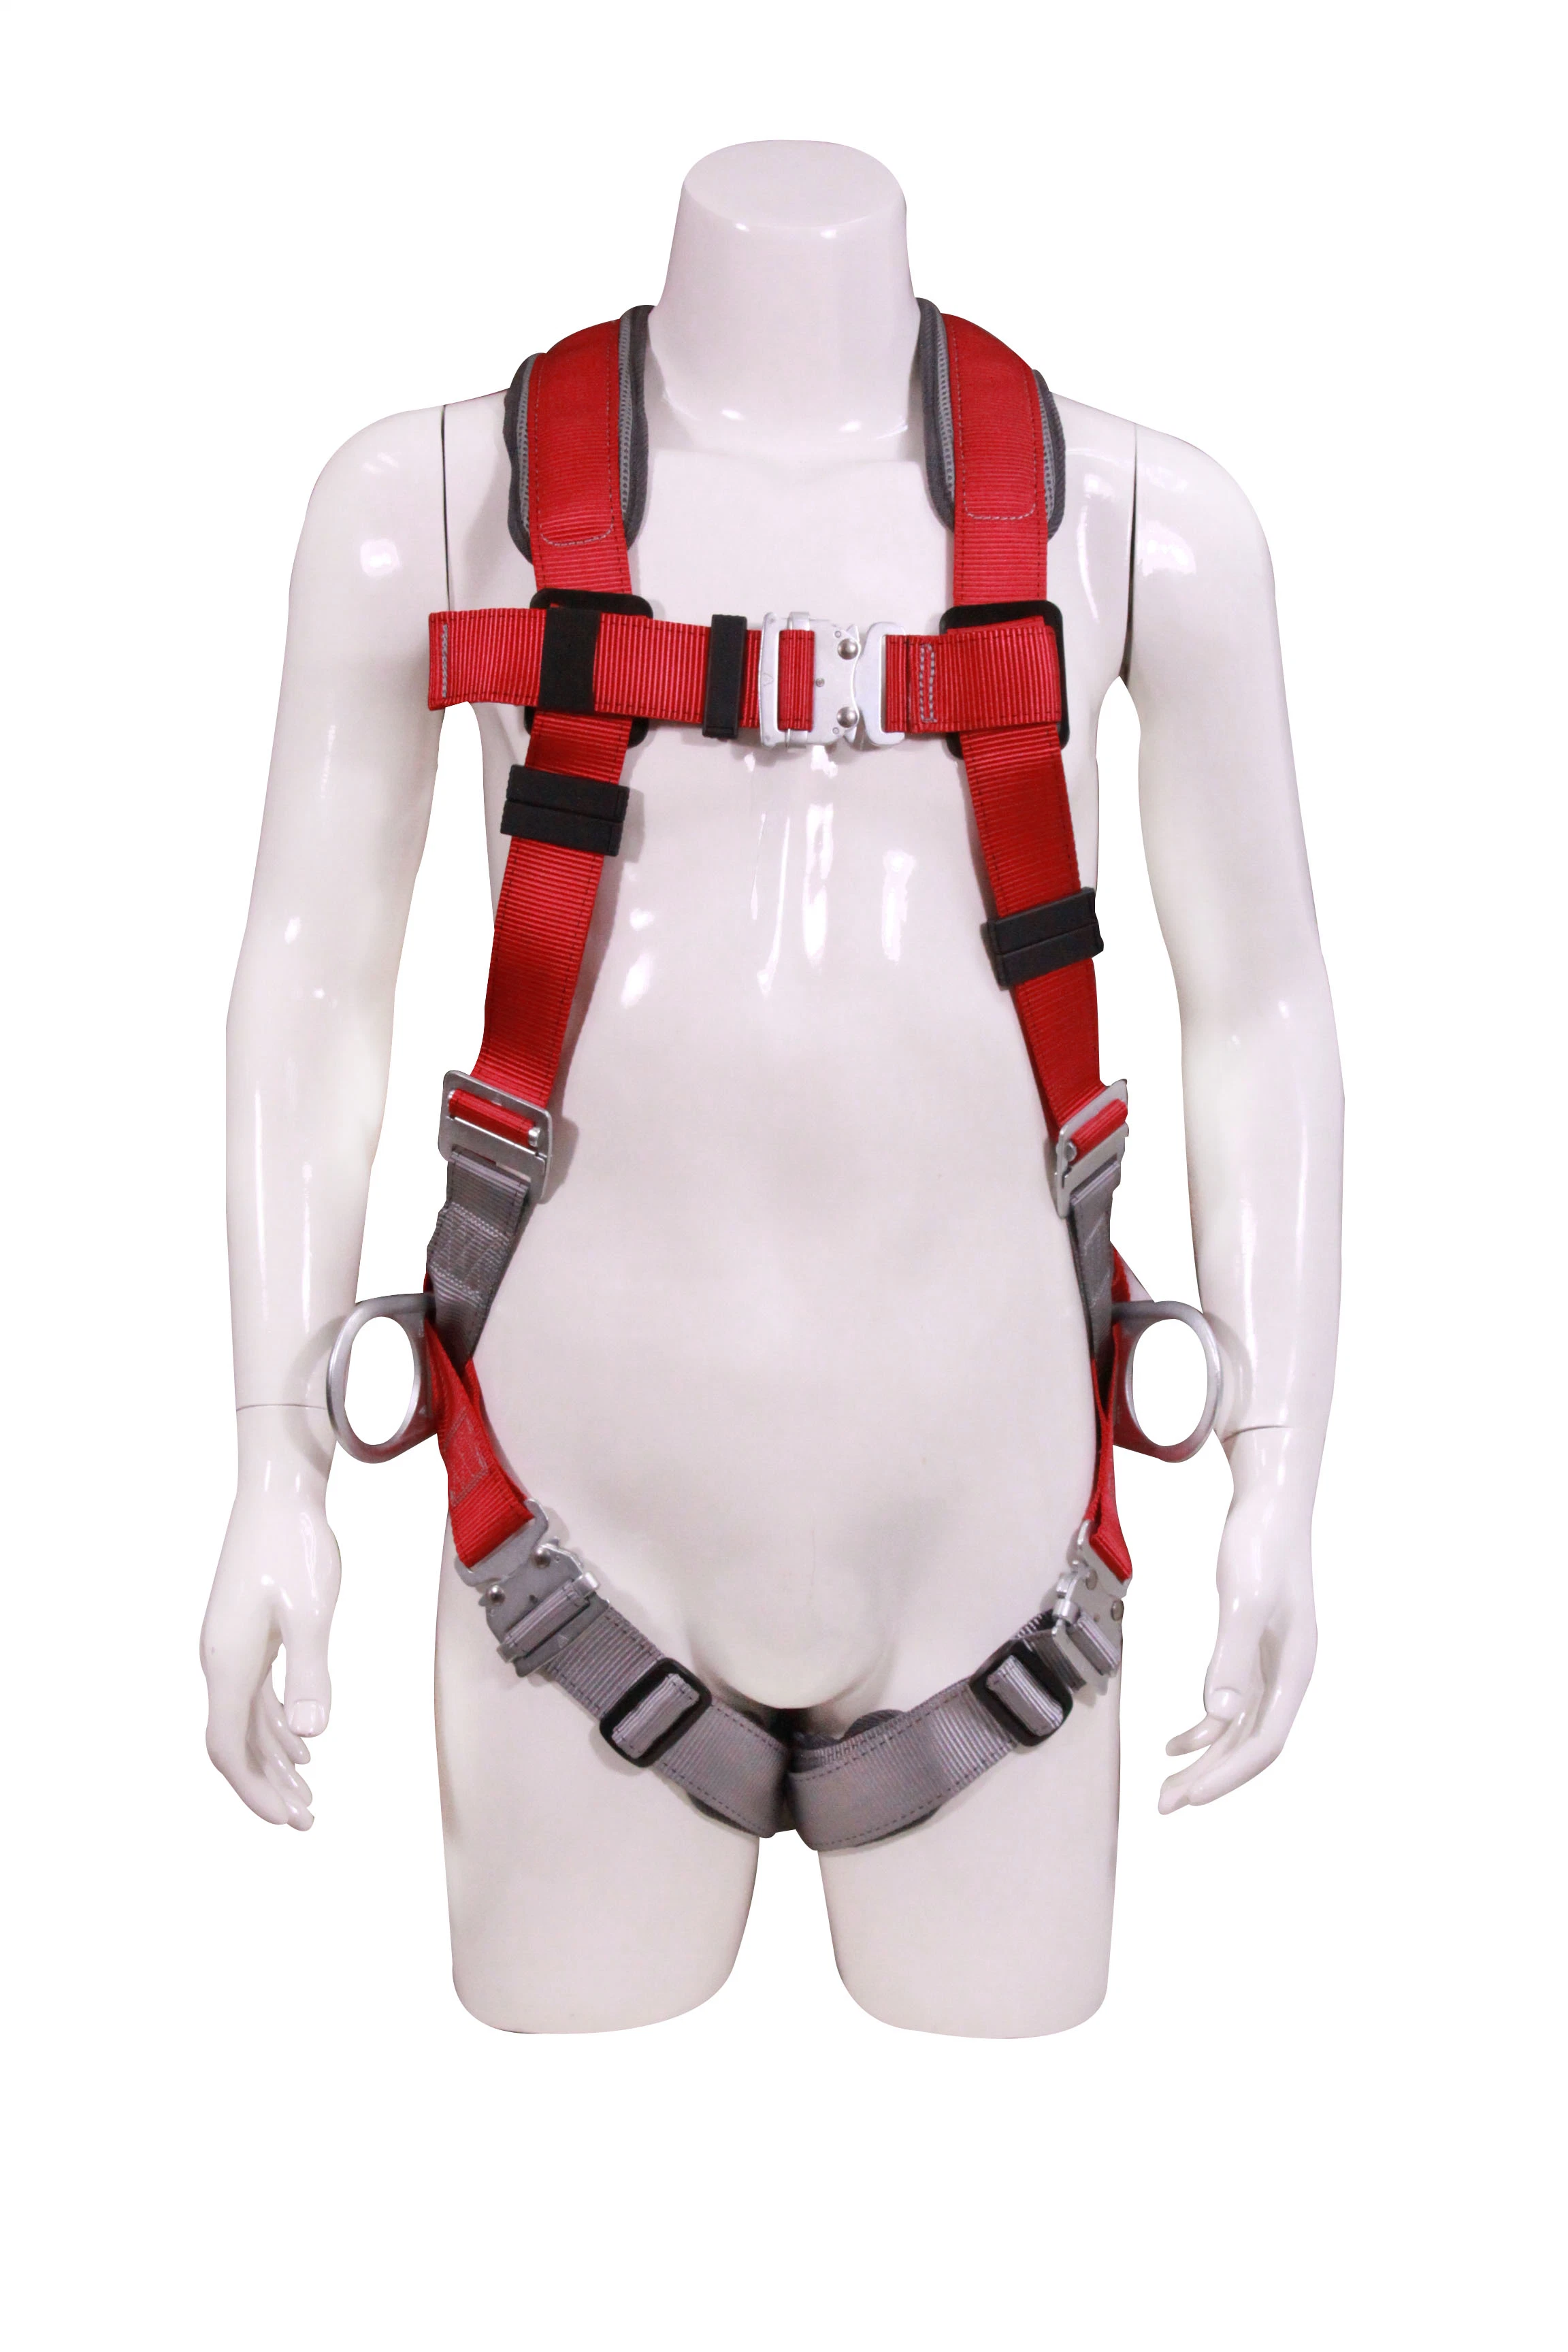 Fall Protection Waterproof Fulll Body Safety Harness Kit